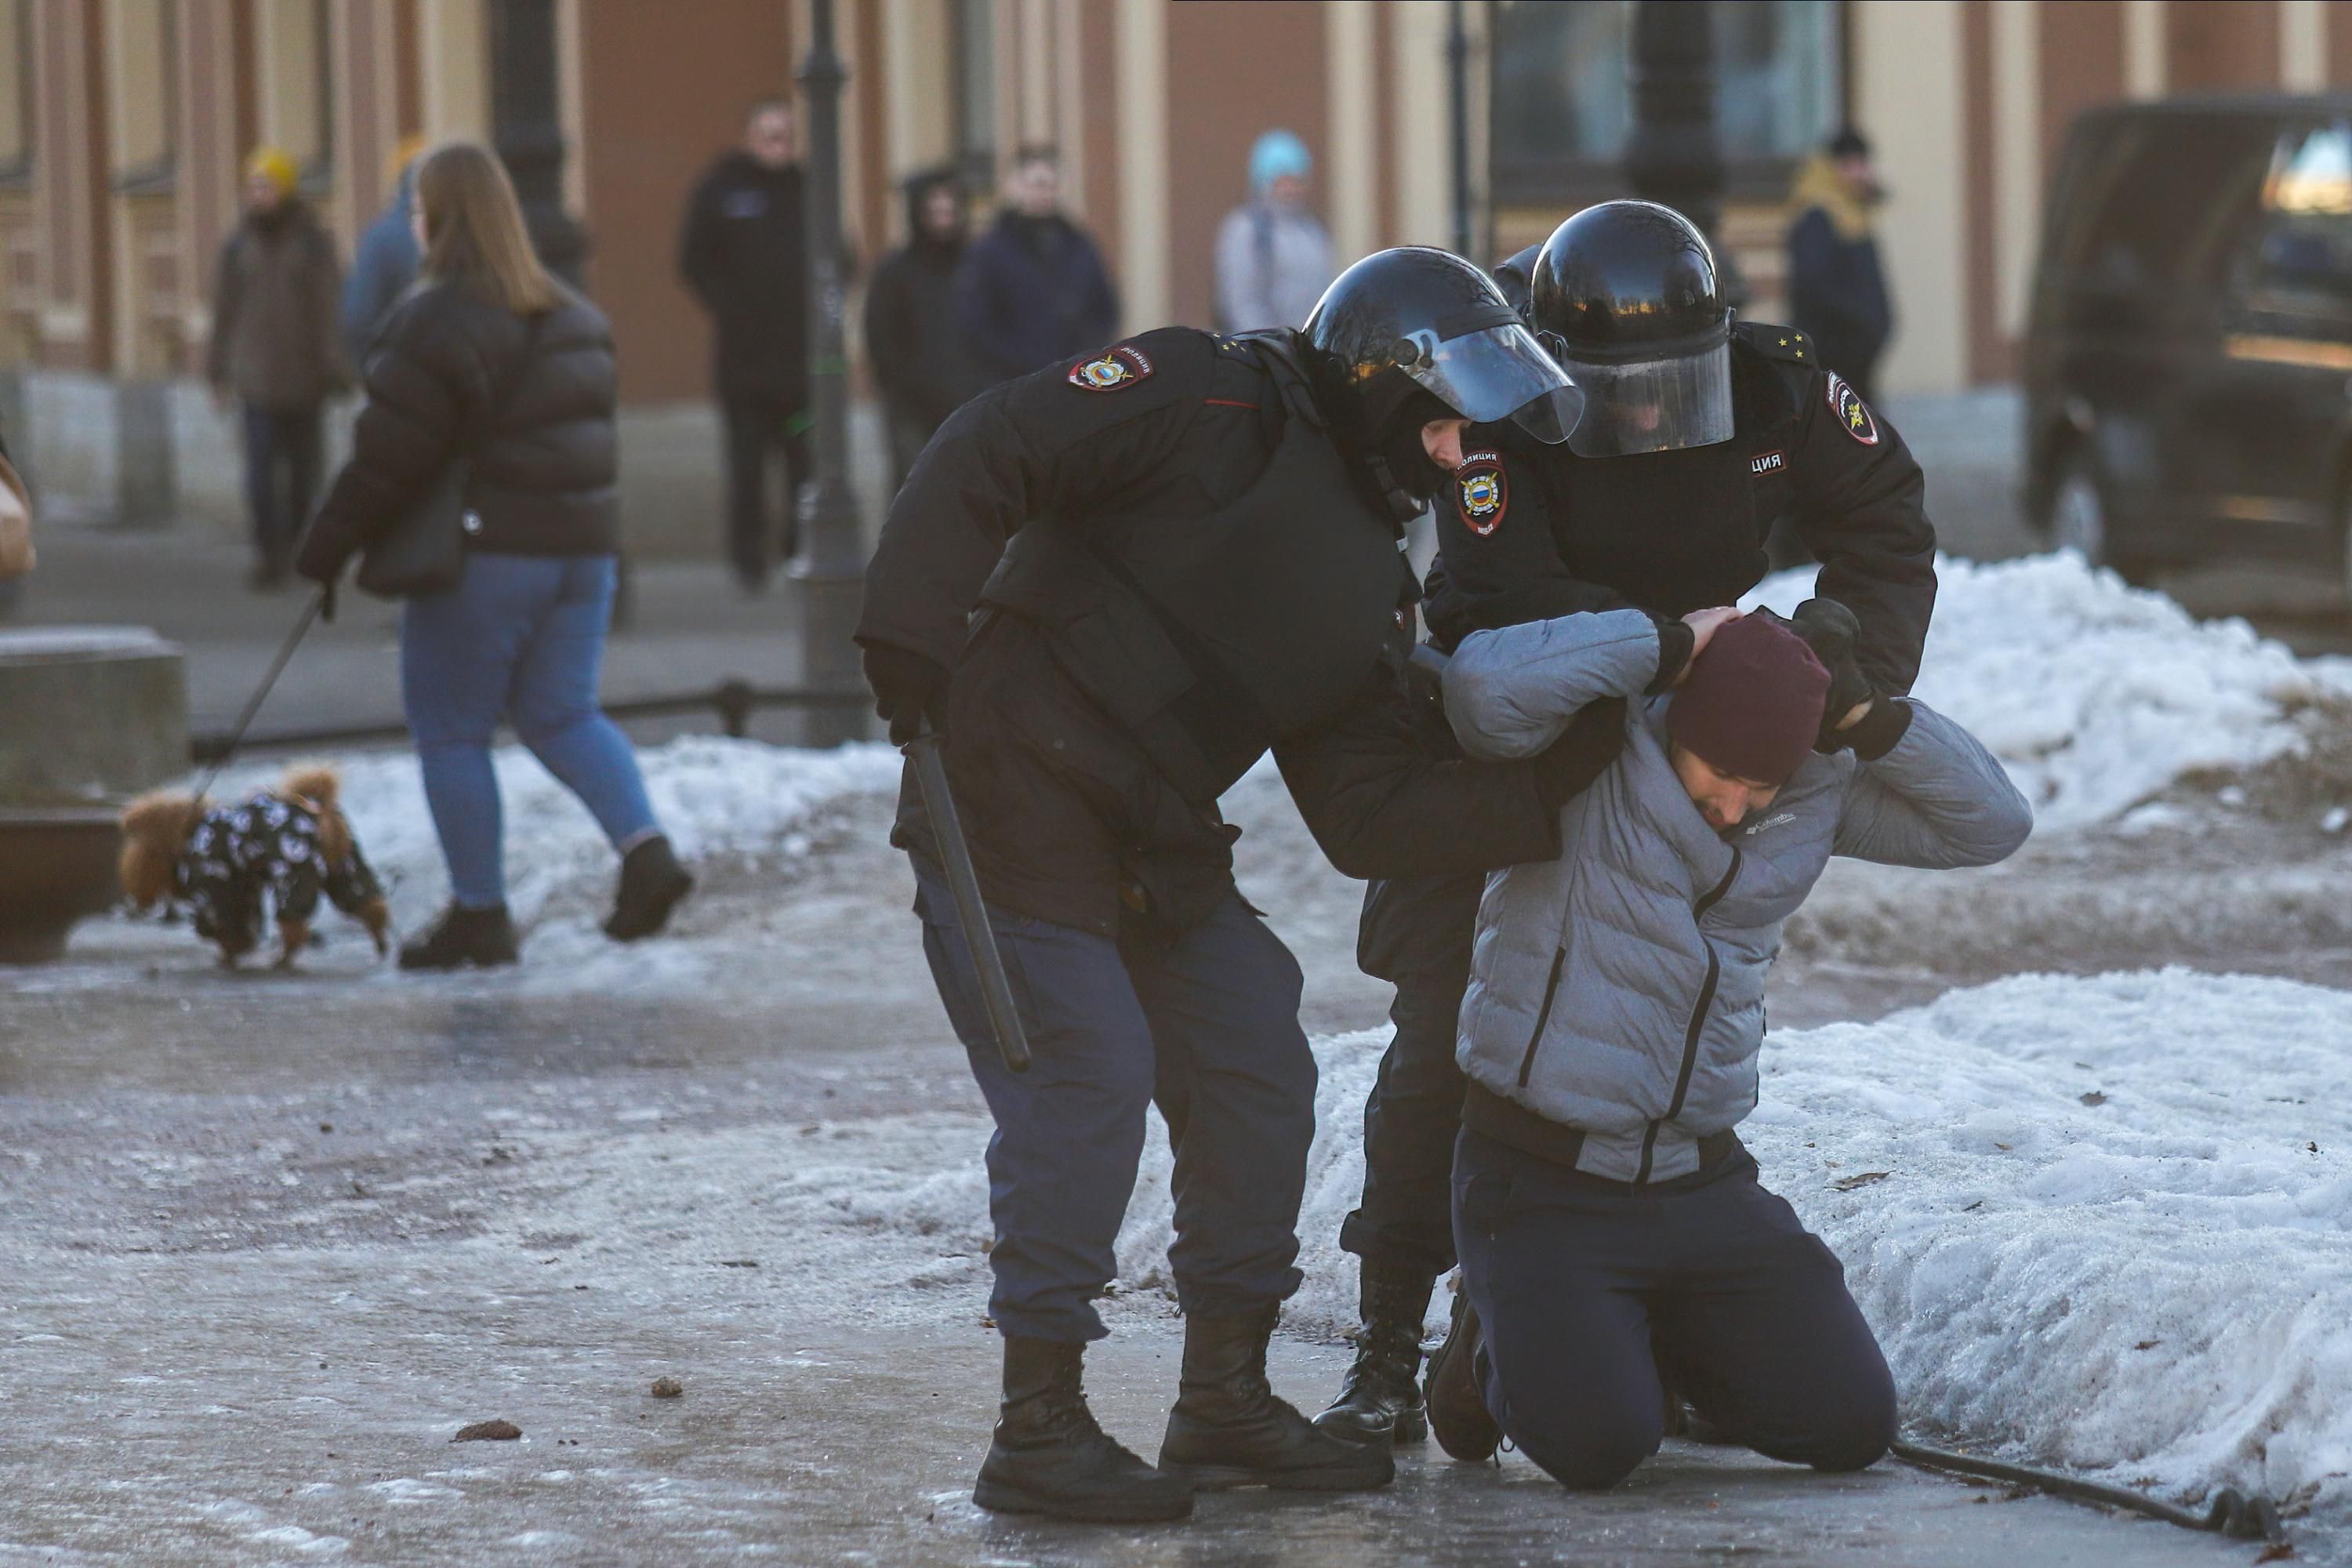 Russian protester arrested